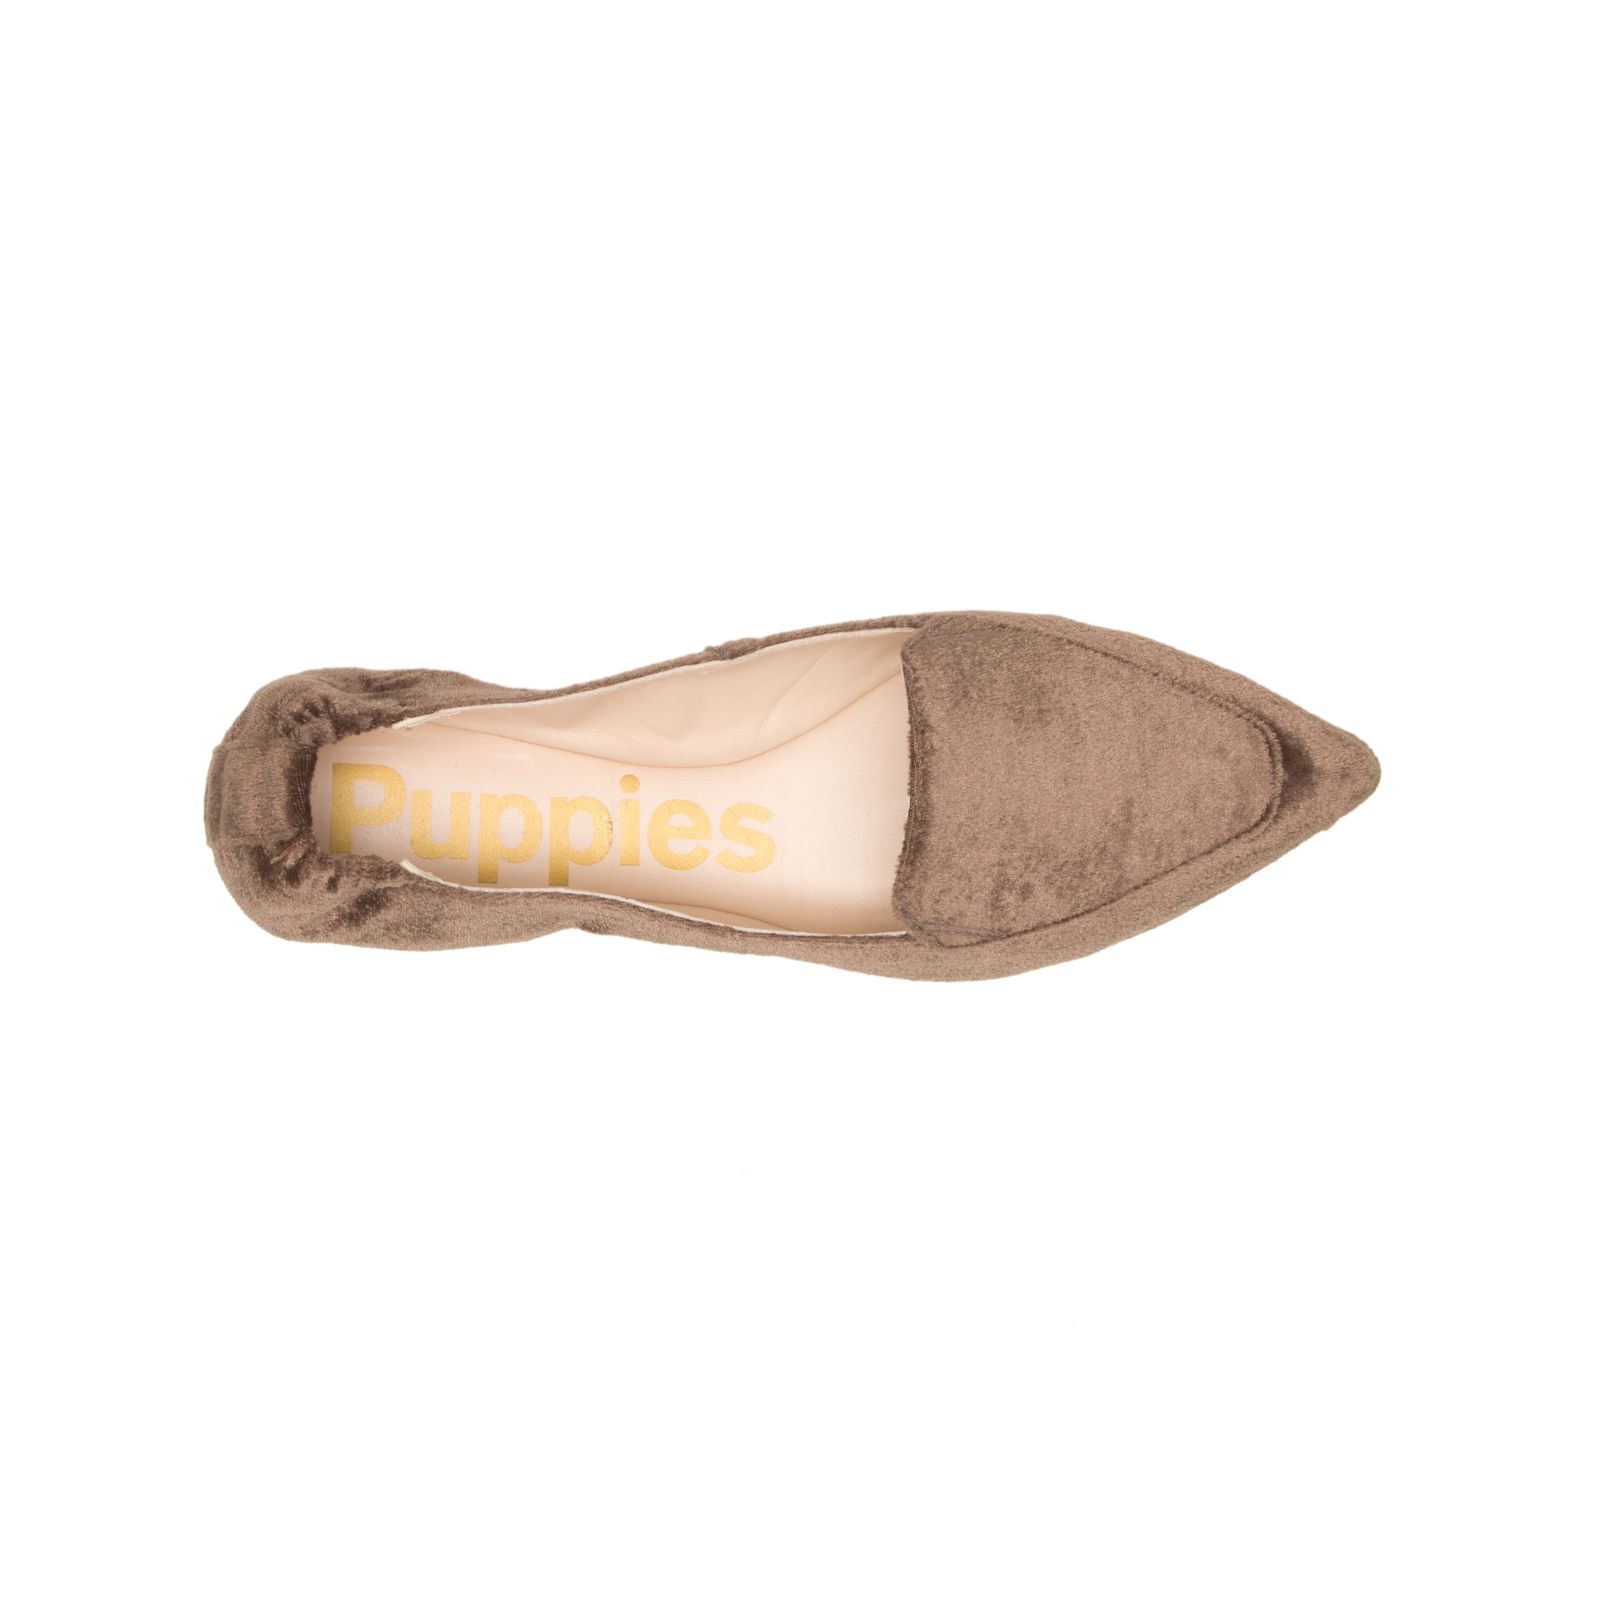 Loafers Hush Puppies Hazel Pointe Mujer Marrom Oscuro | DQBSNOT-40